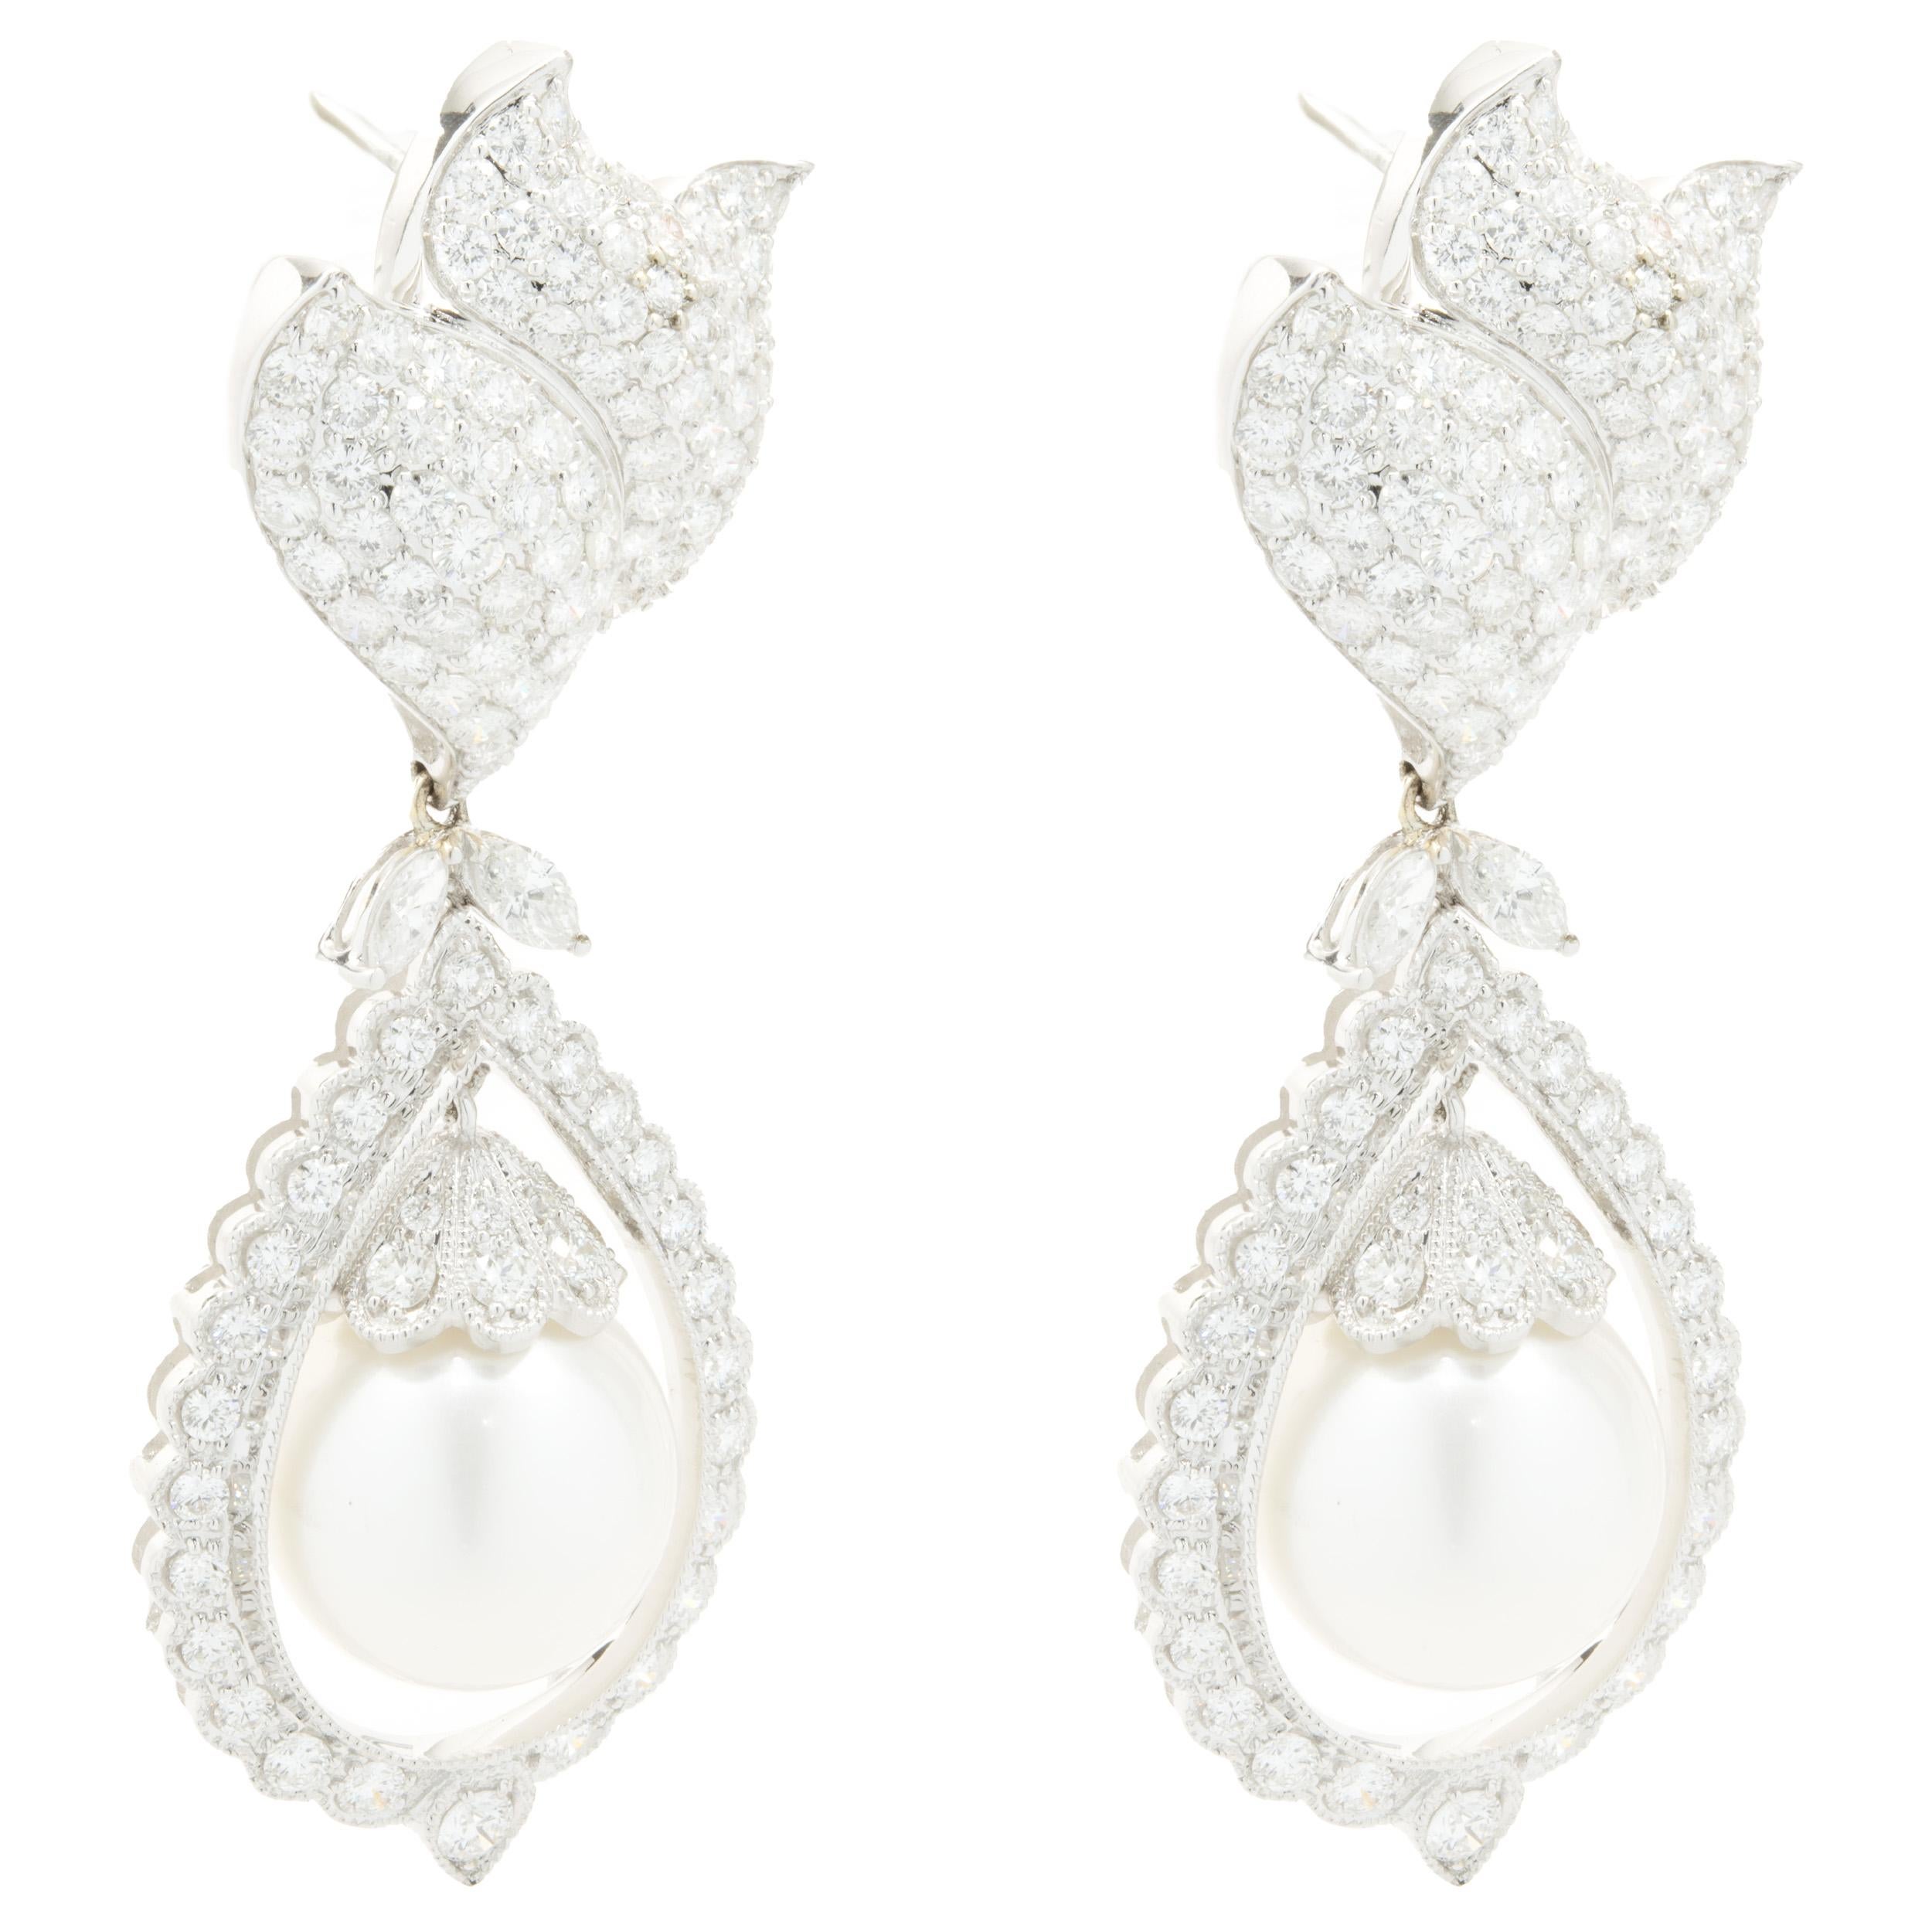 18 Karat White Gold Pave Diamond and South Sea Pearl Drop Earrings In Excellent Condition For Sale In Scottsdale, AZ